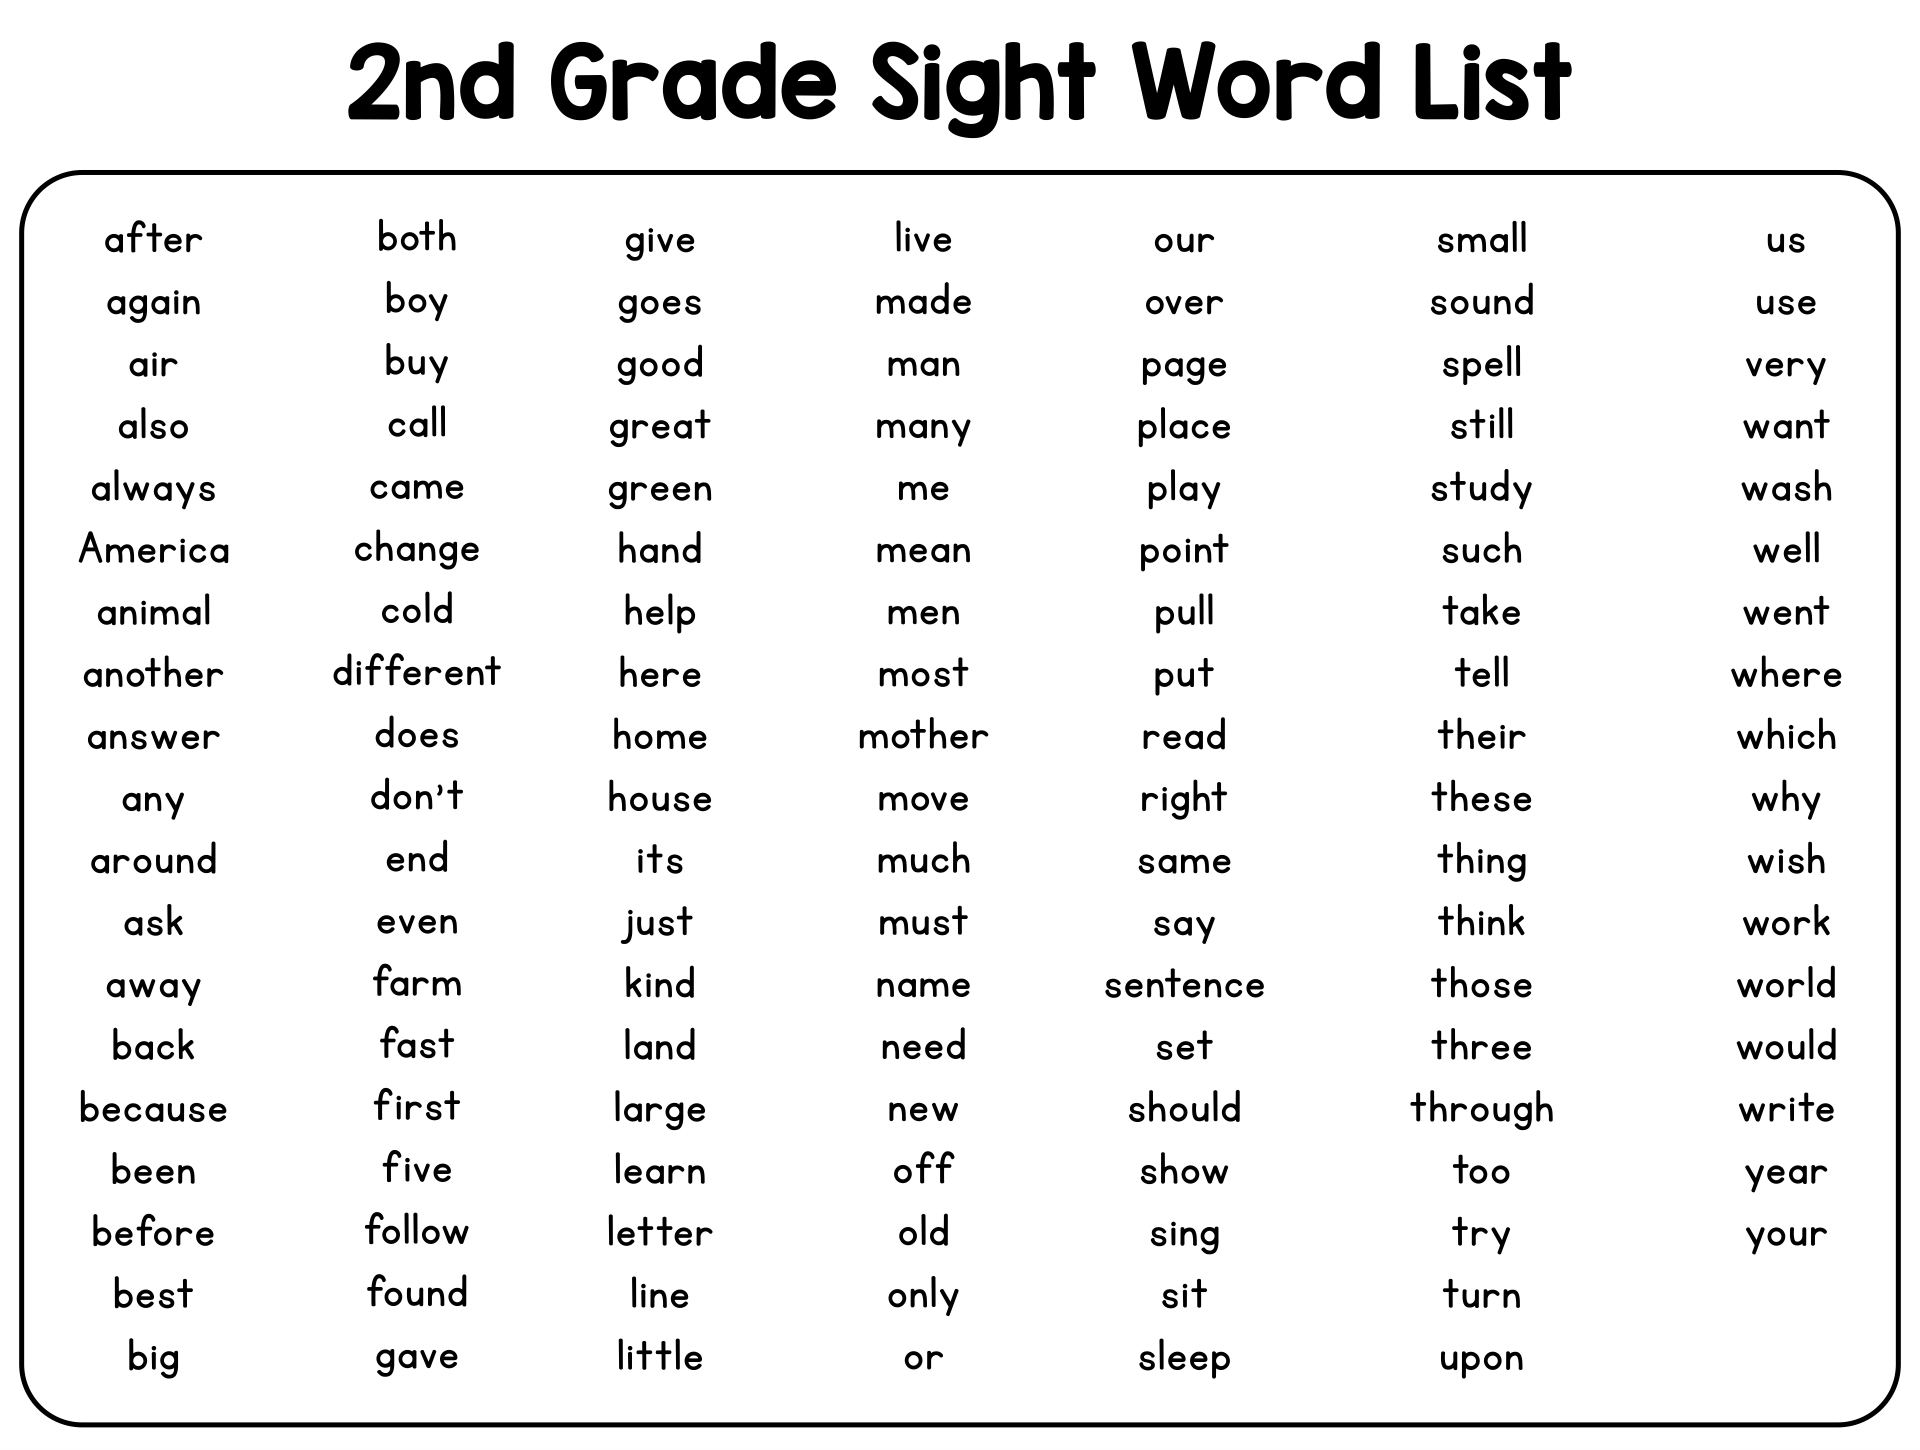 24 Best Second Grade Sight Words Printable - printablee.com Throughout 2nd Grade Sight Words Worksheet